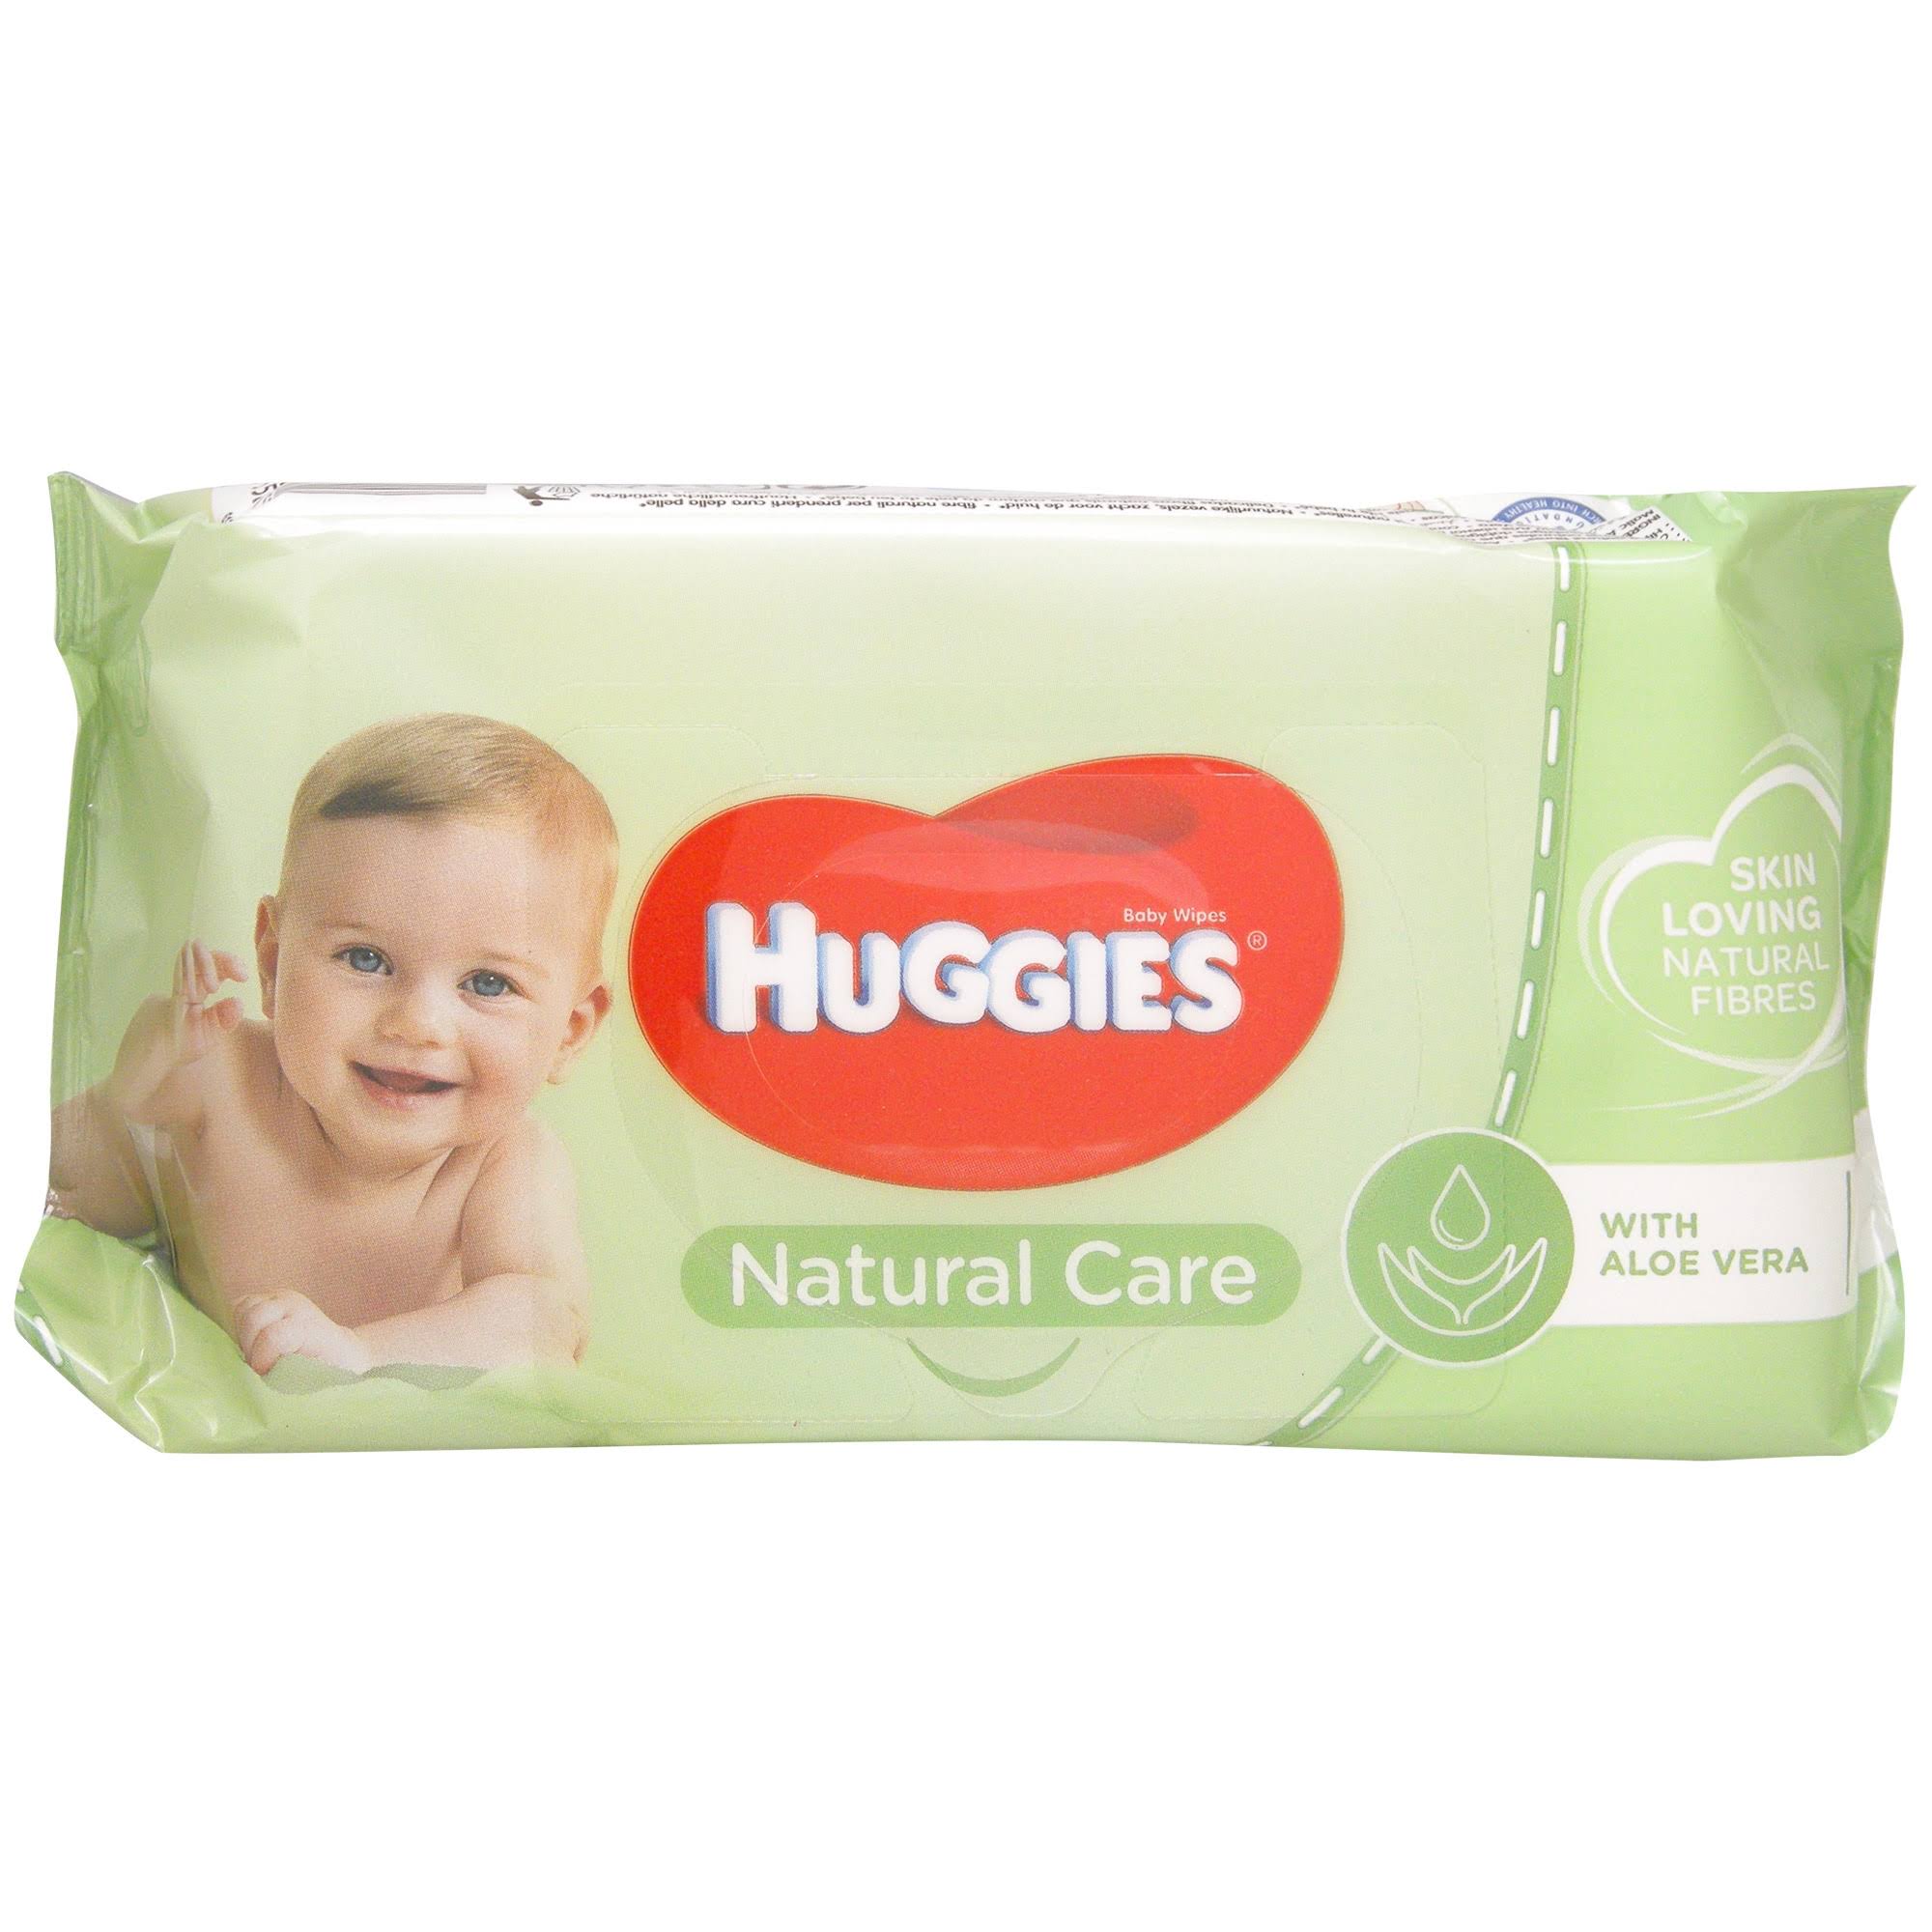 Huggies Natural Care Baby Wipes - 56 Wipes